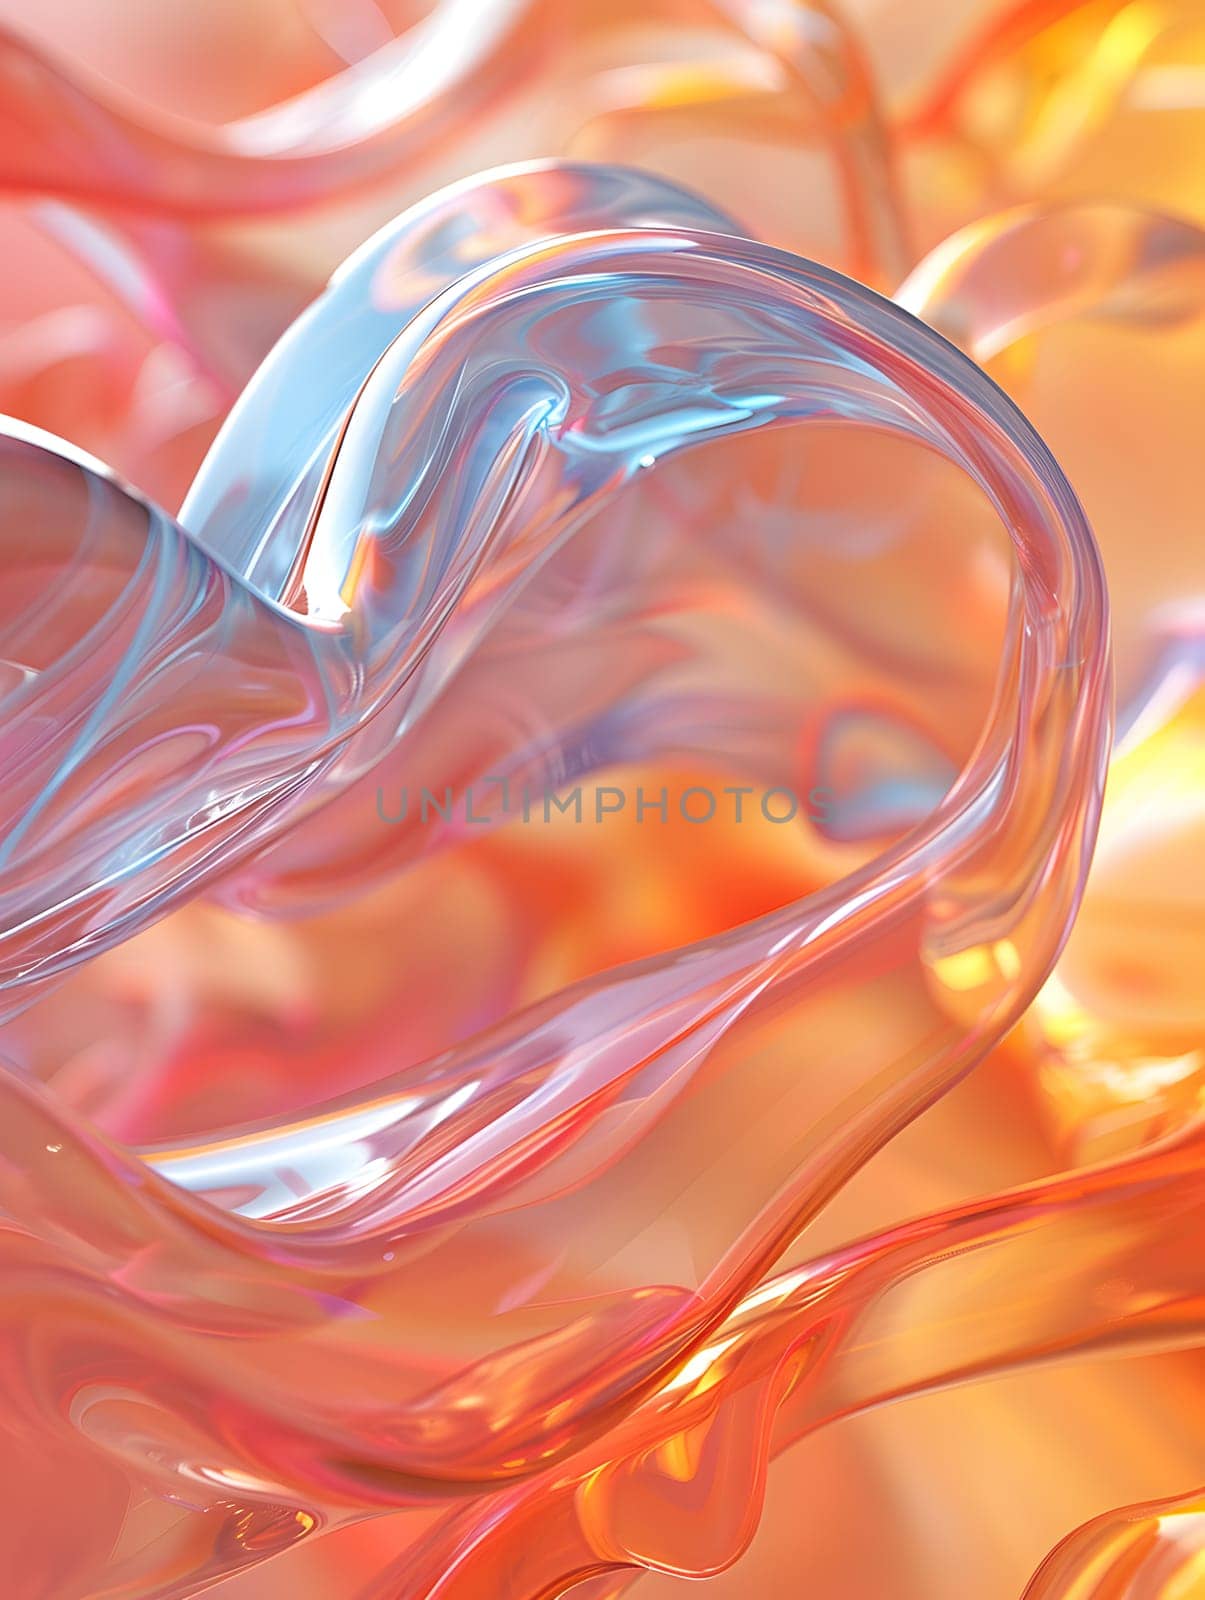 a close up of a colorful heart shaped object by Nadtochiy